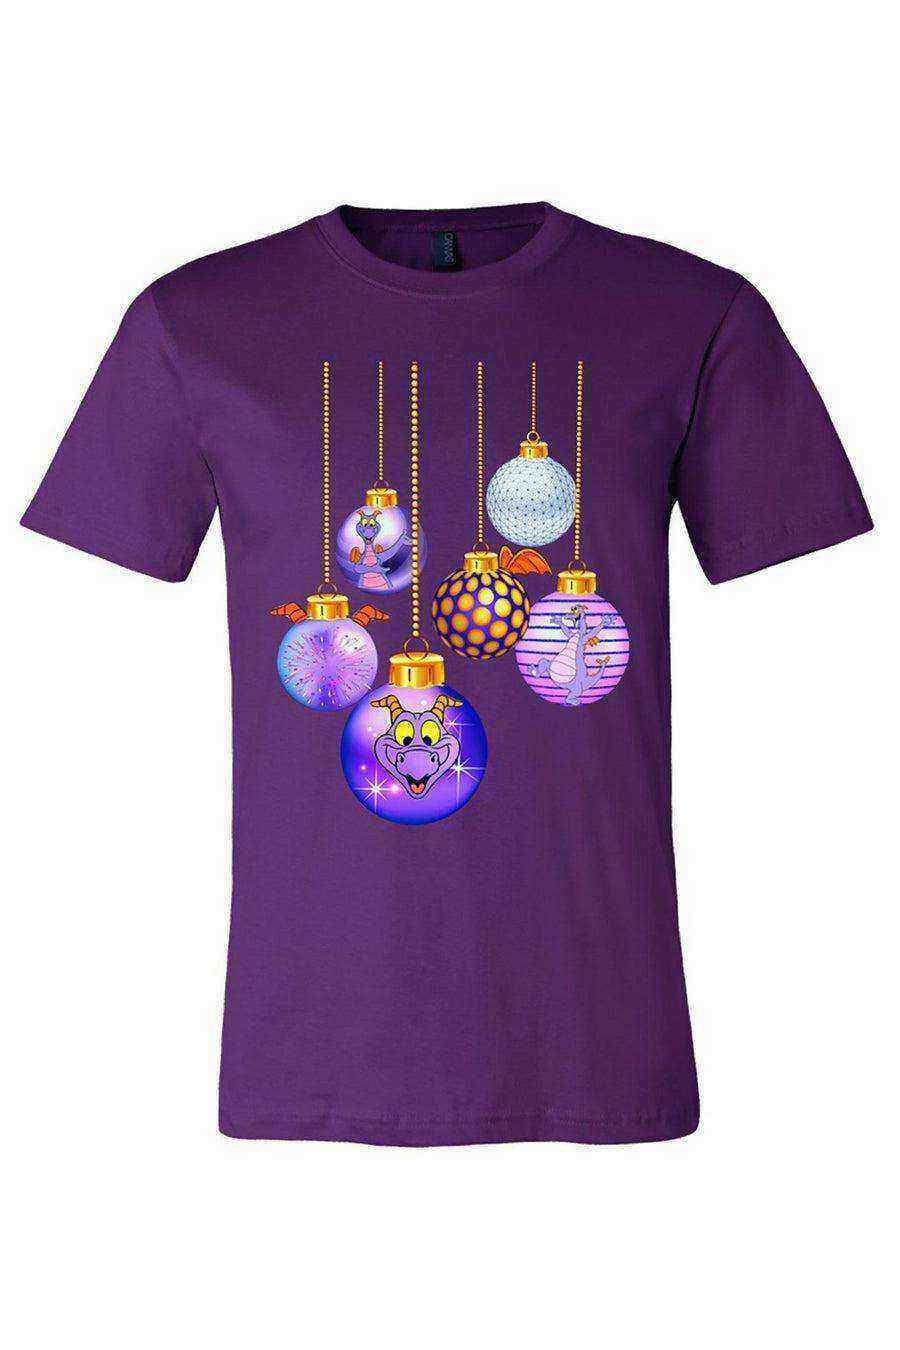 Figment Ornament Tee - Dylan's Tees